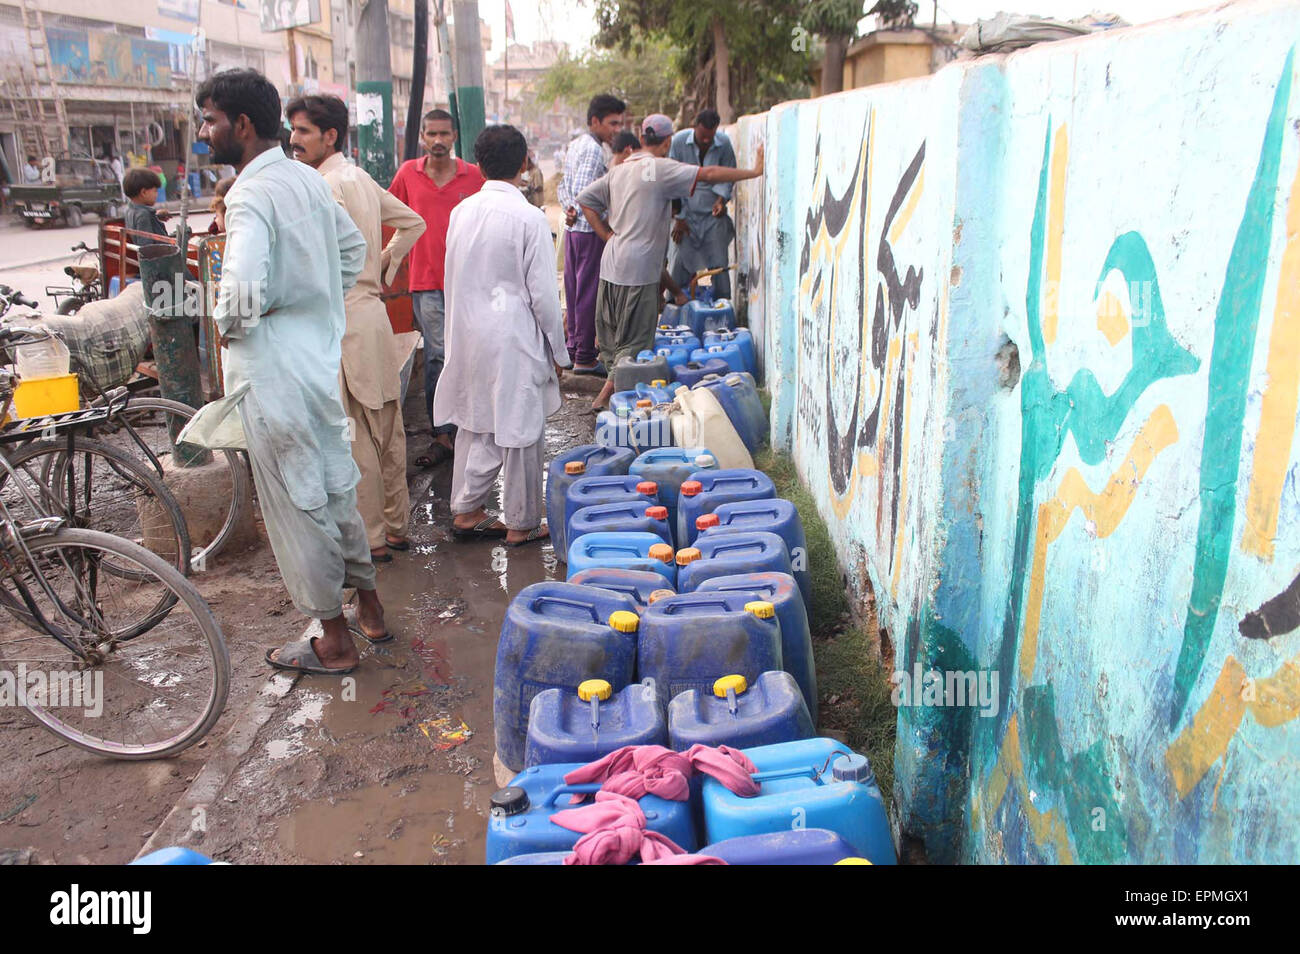 Water shortage in the metropolitan continues as residents of different areas have no option but to buy water on hiked price, in photo residents of Mehmoodabad can be seen filling their pots and empty gallons with water due to water crises in their locality on Tuesday, May 19, 2015. Stock Photo